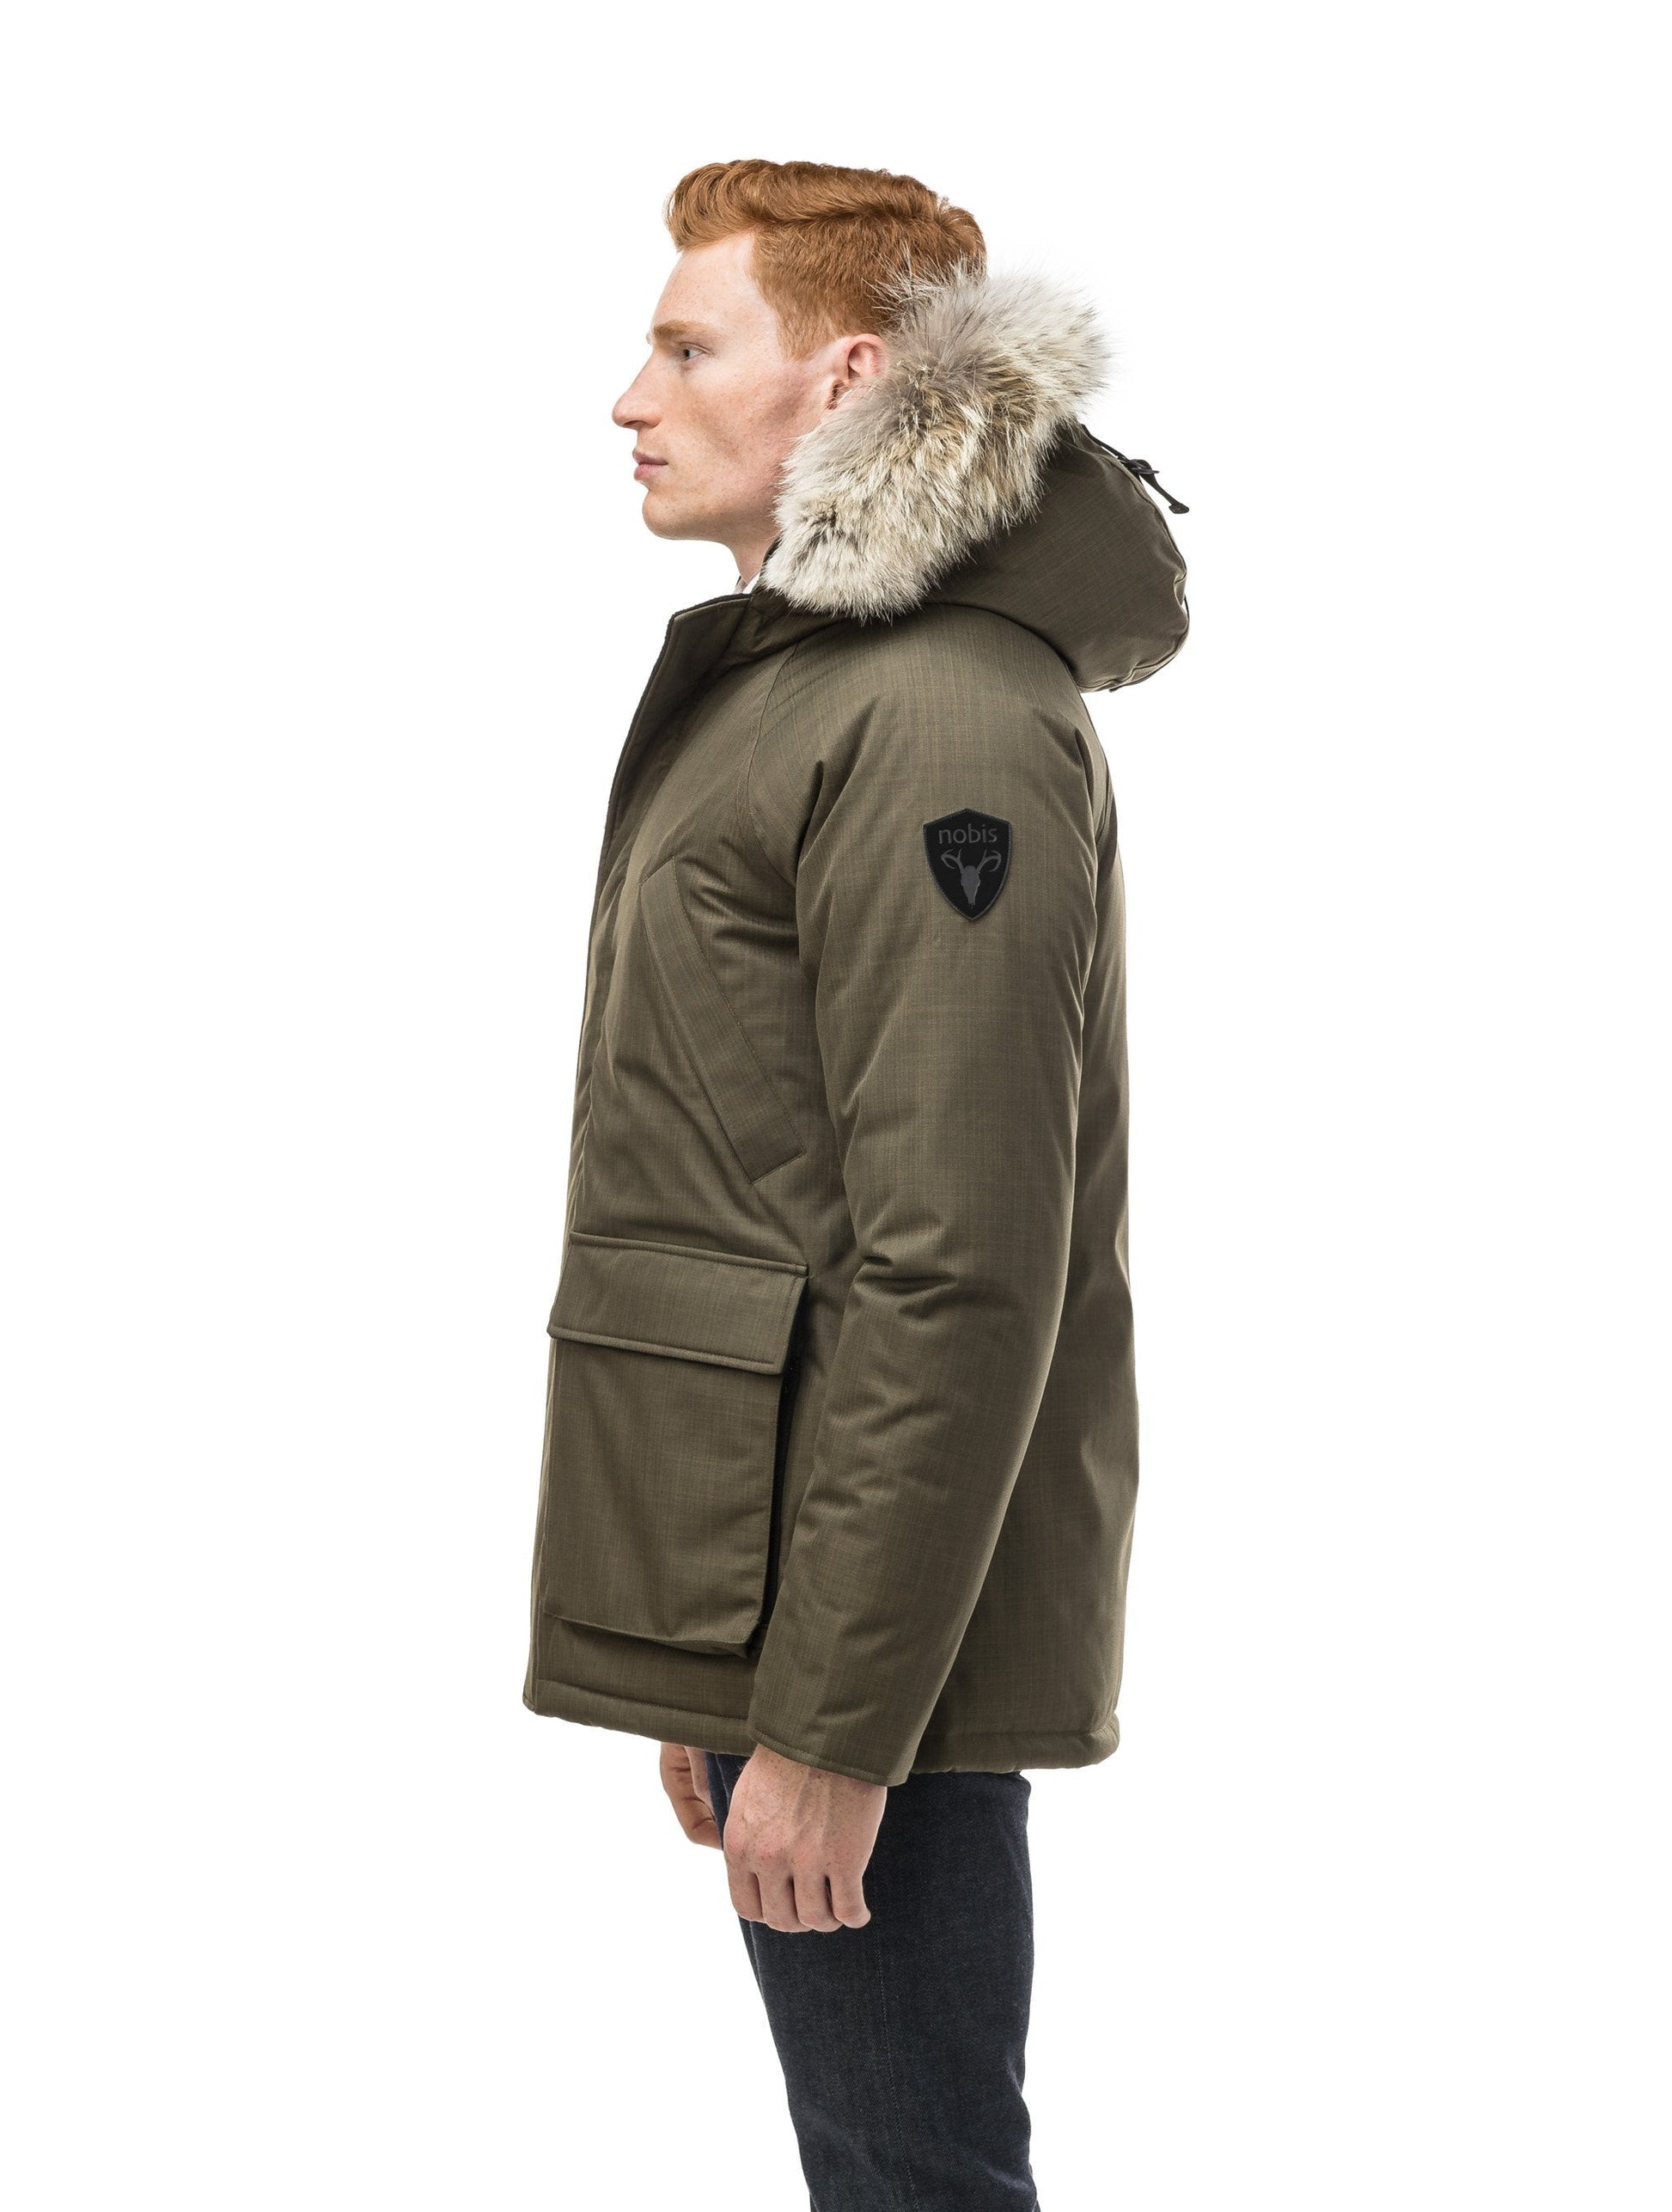 Men's waist length down filled jacket with two front pockets with magnetic closure and a removable fur trim on the hood in CH Army Green